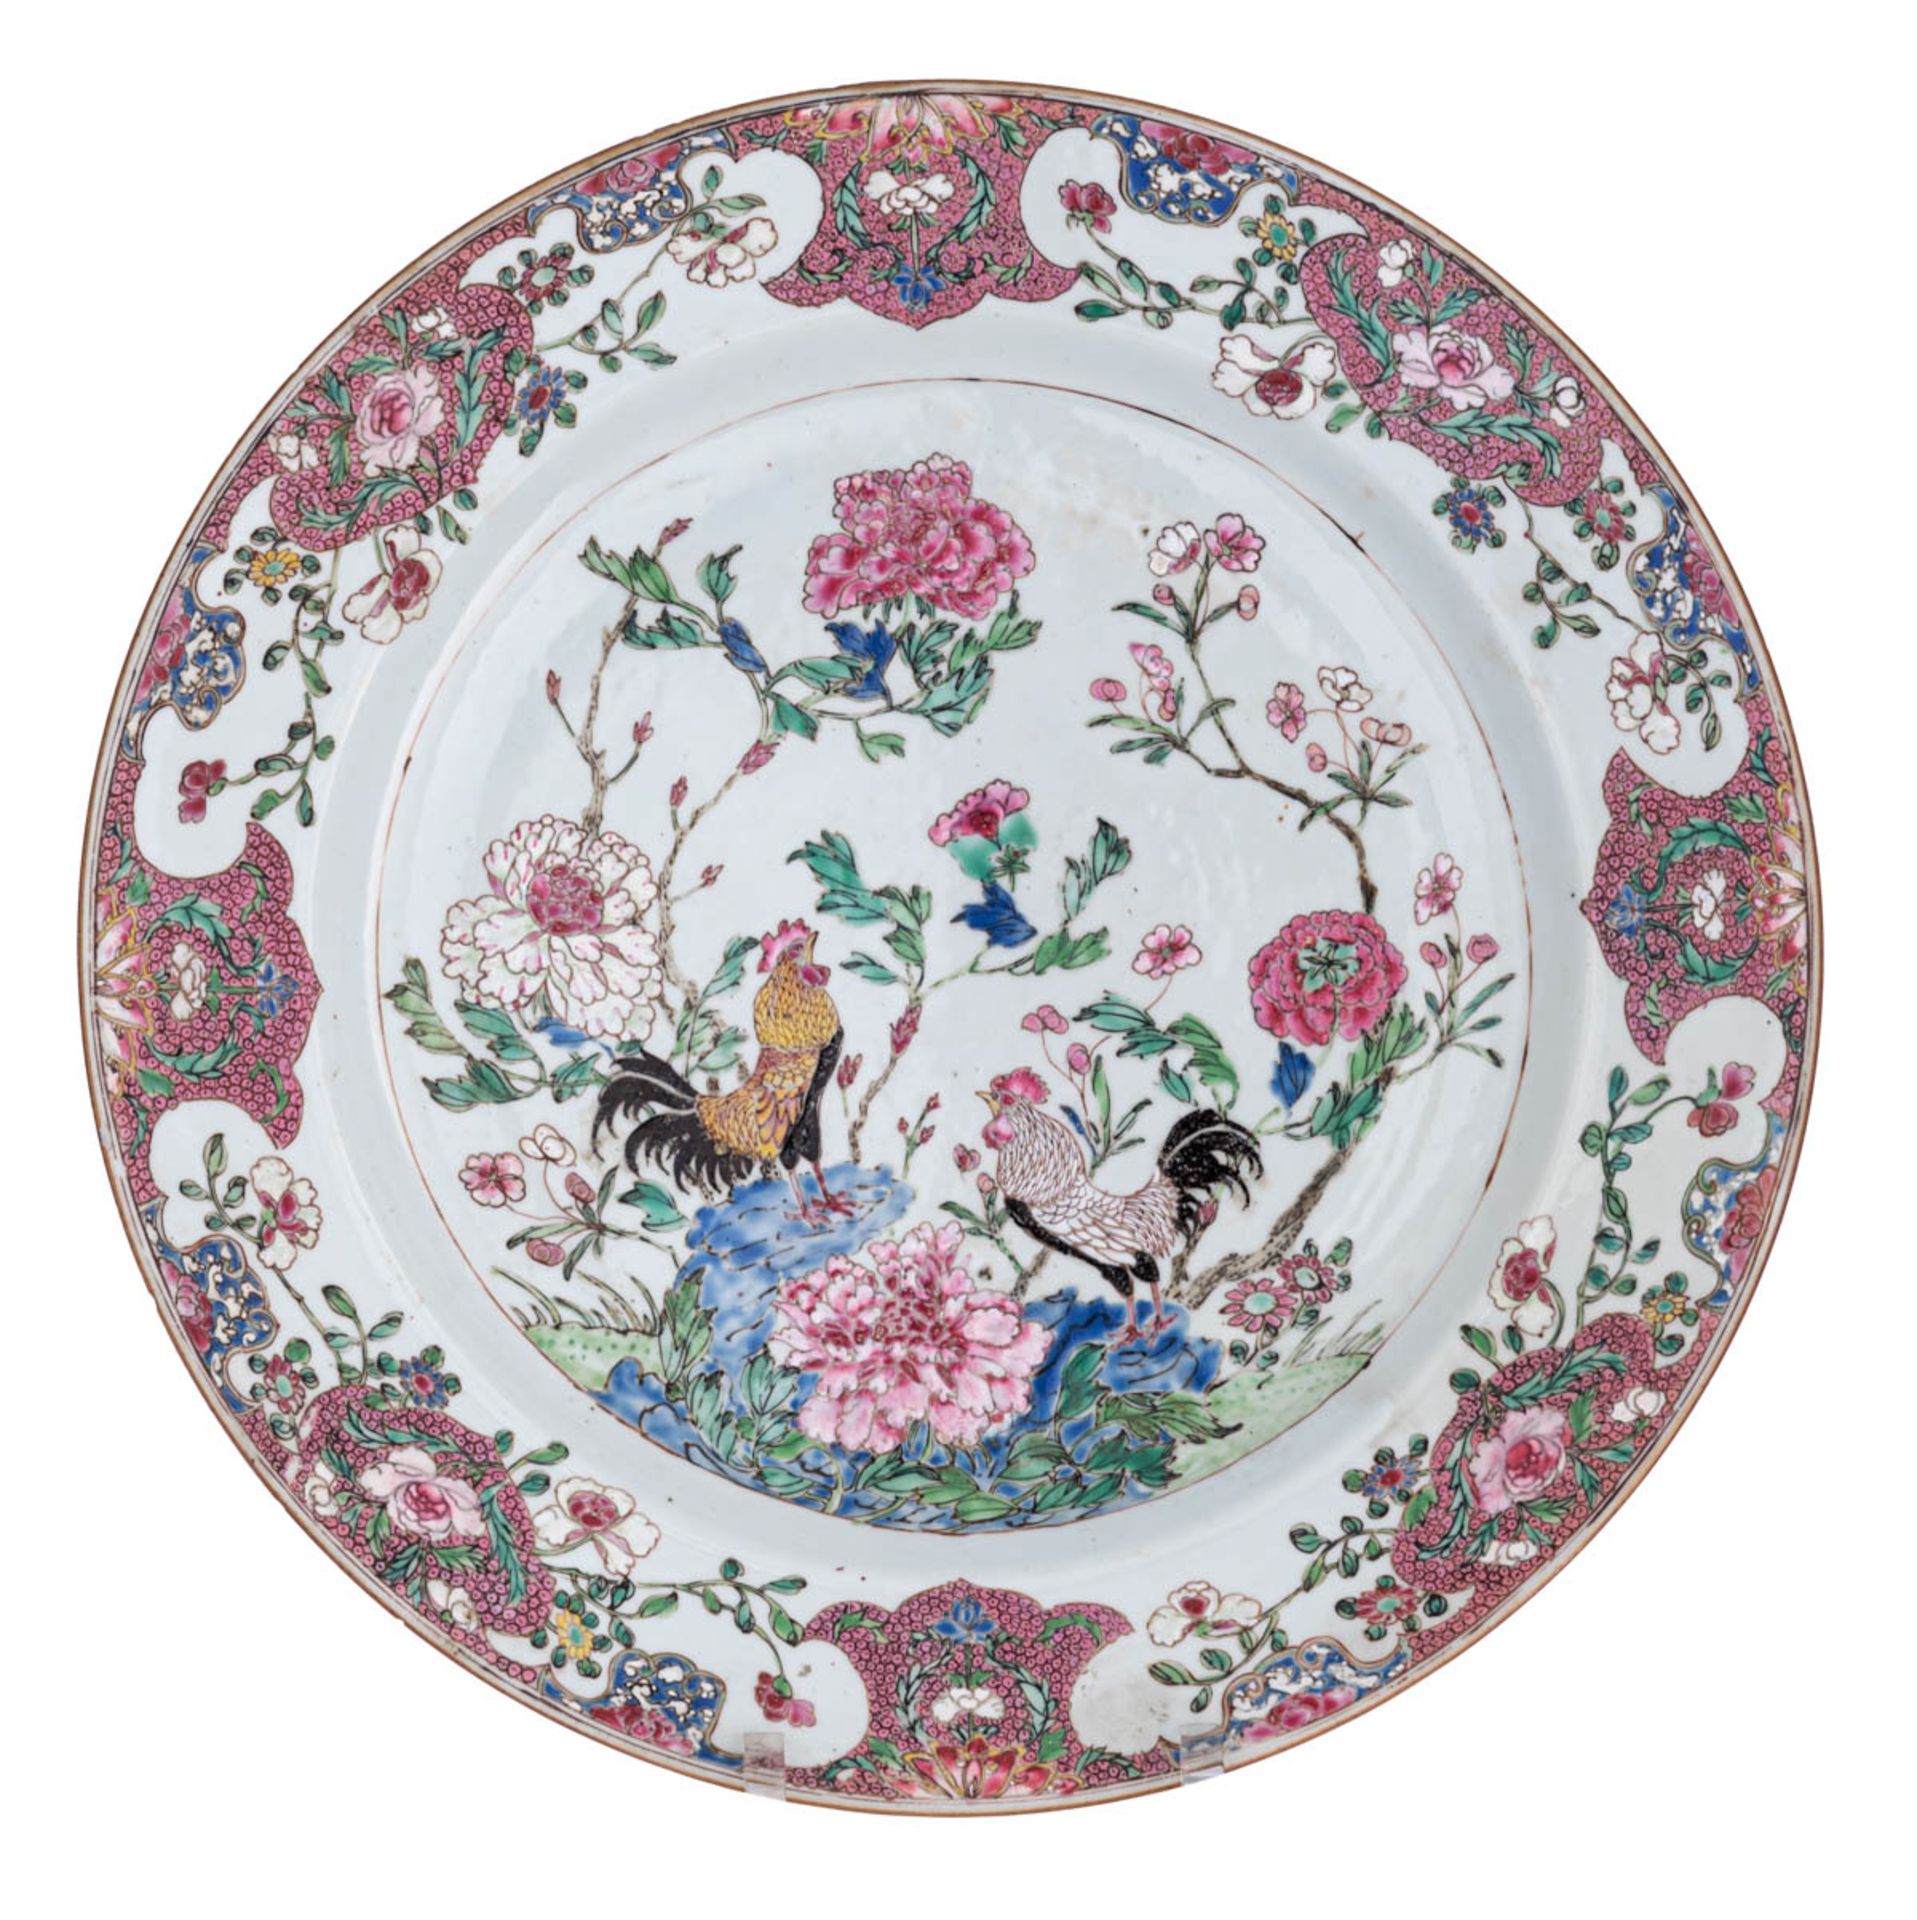 A Chinese famille rose export porcelain plate